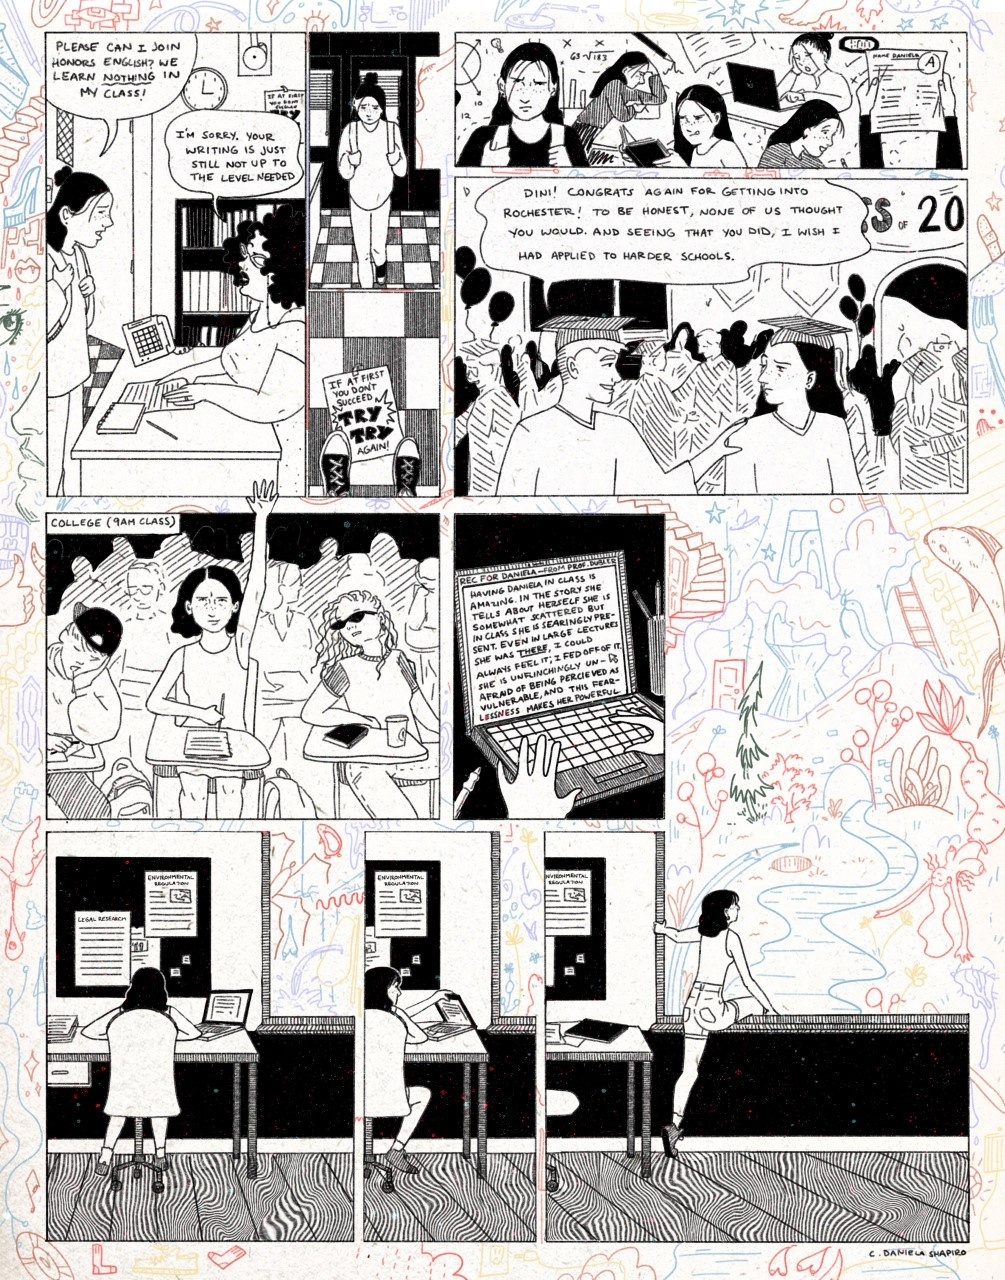 Comic strip depicting a young woman trying hard in school and getting into a university. In the last few panels she walks out of the window behind her study table into a colorful landscape